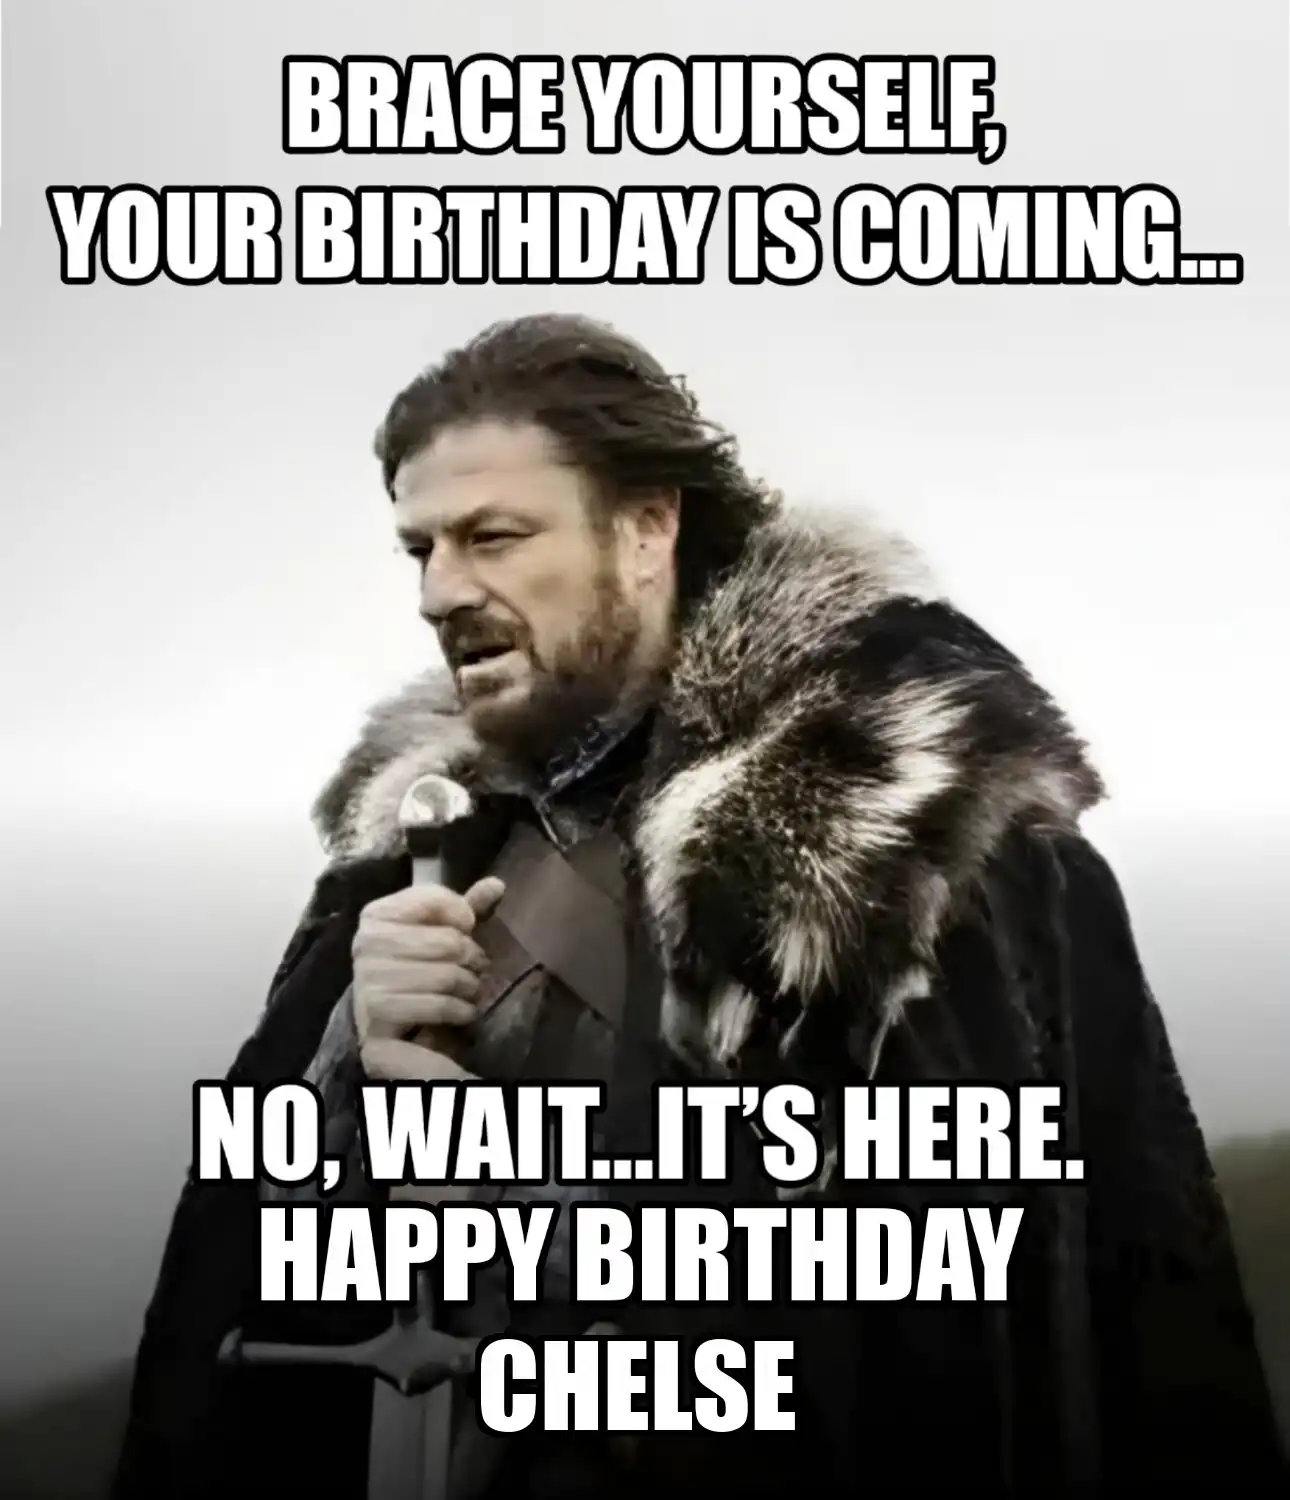 Happy Birthday Chelse Brace Yourself Your Birthday Is Coming Meme